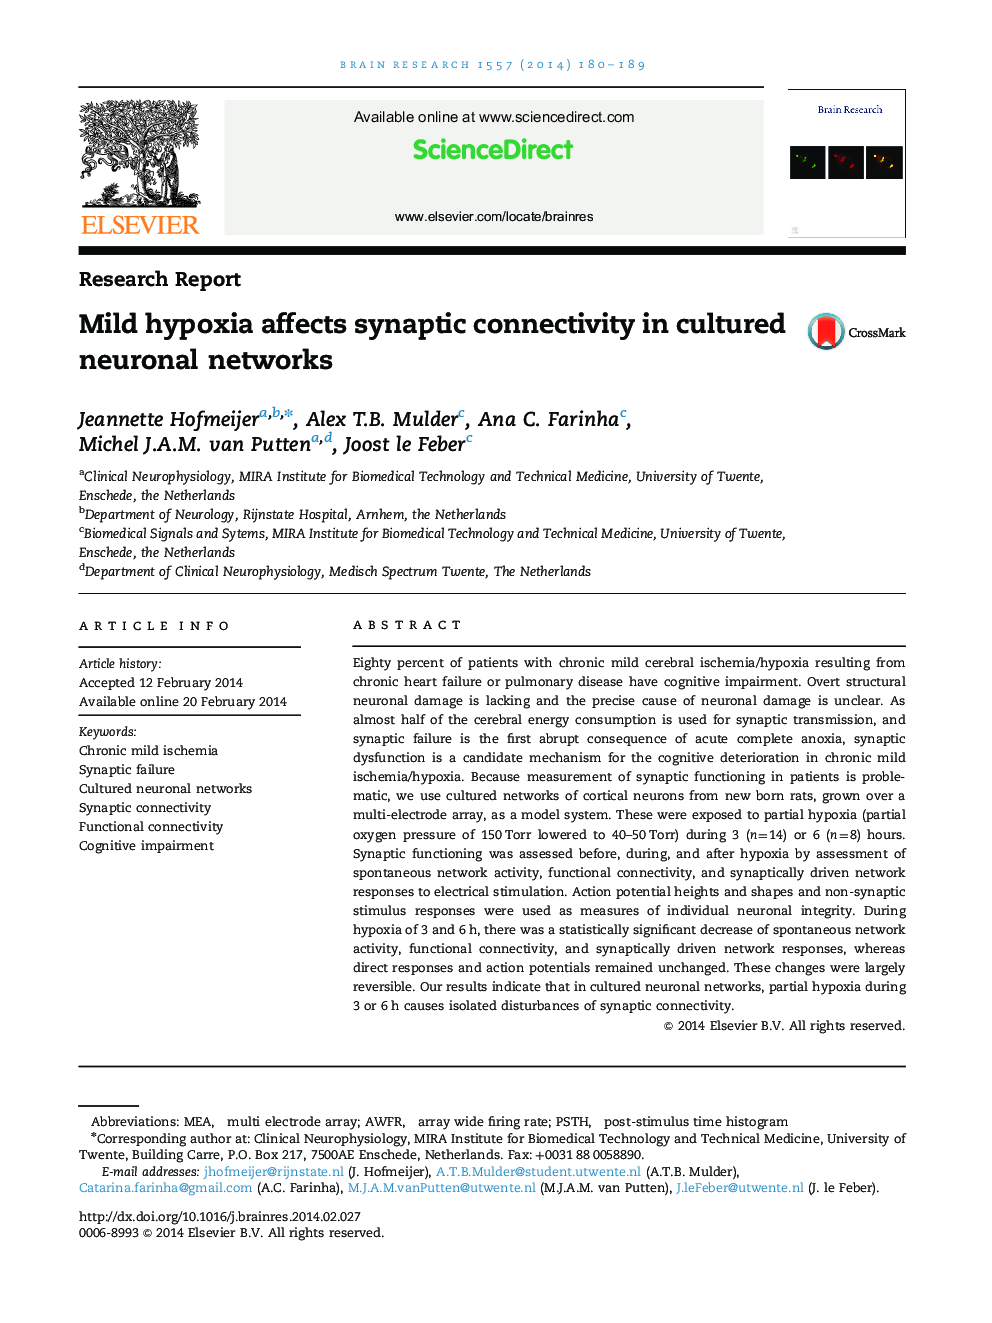 Research ReportMild hypoxia affects synaptic connectivity in cultured neuronal networks